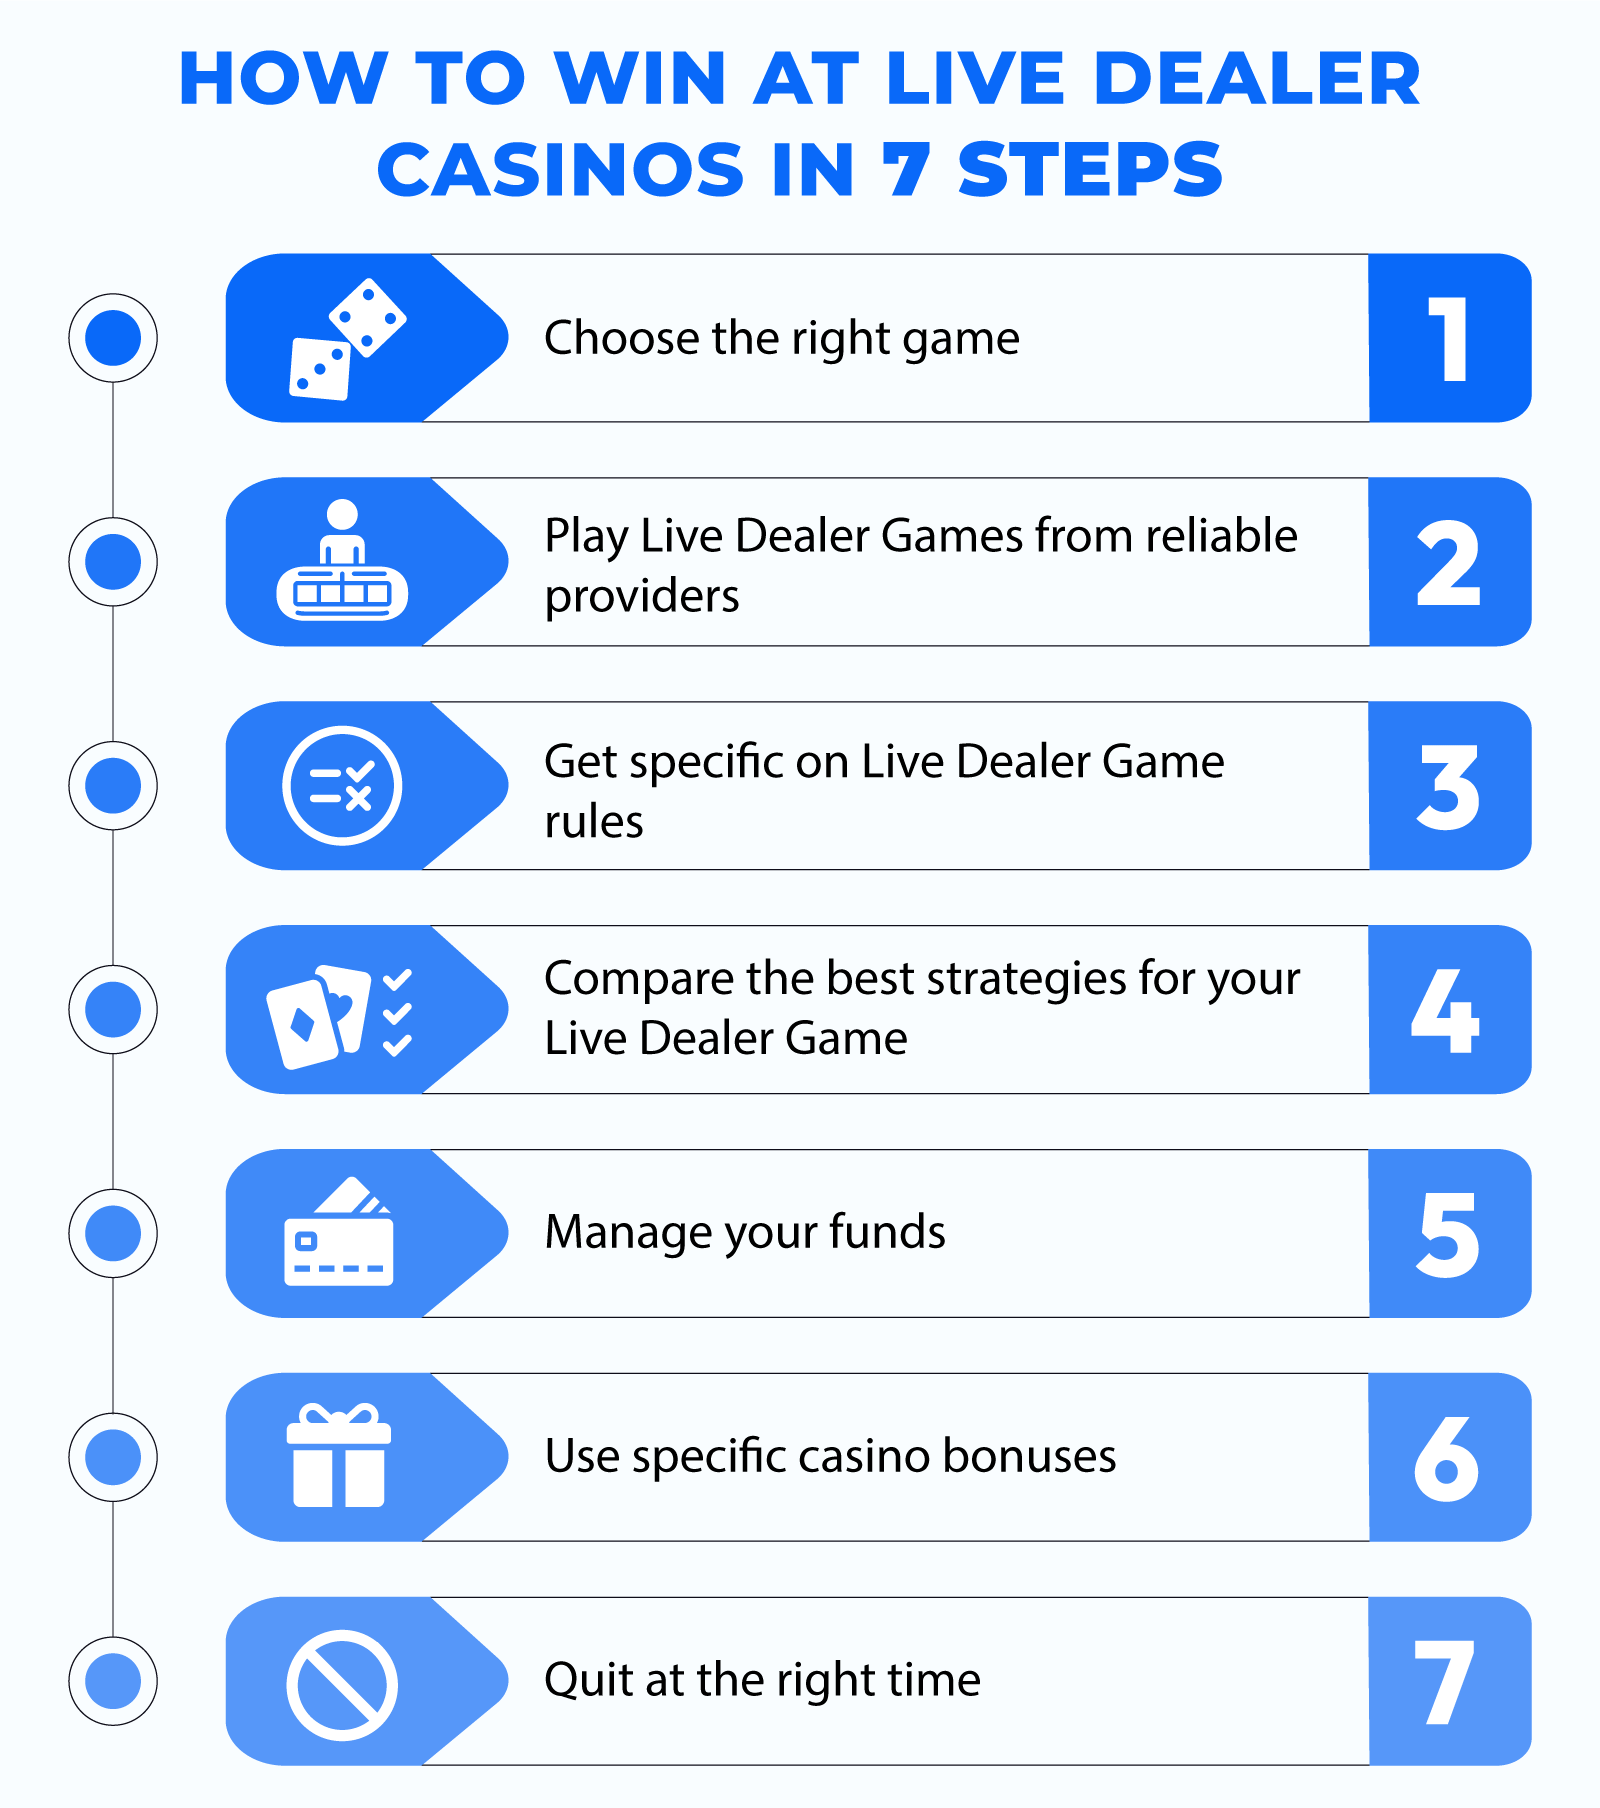 How to Win at Live Dealer Casinos in 7 steps